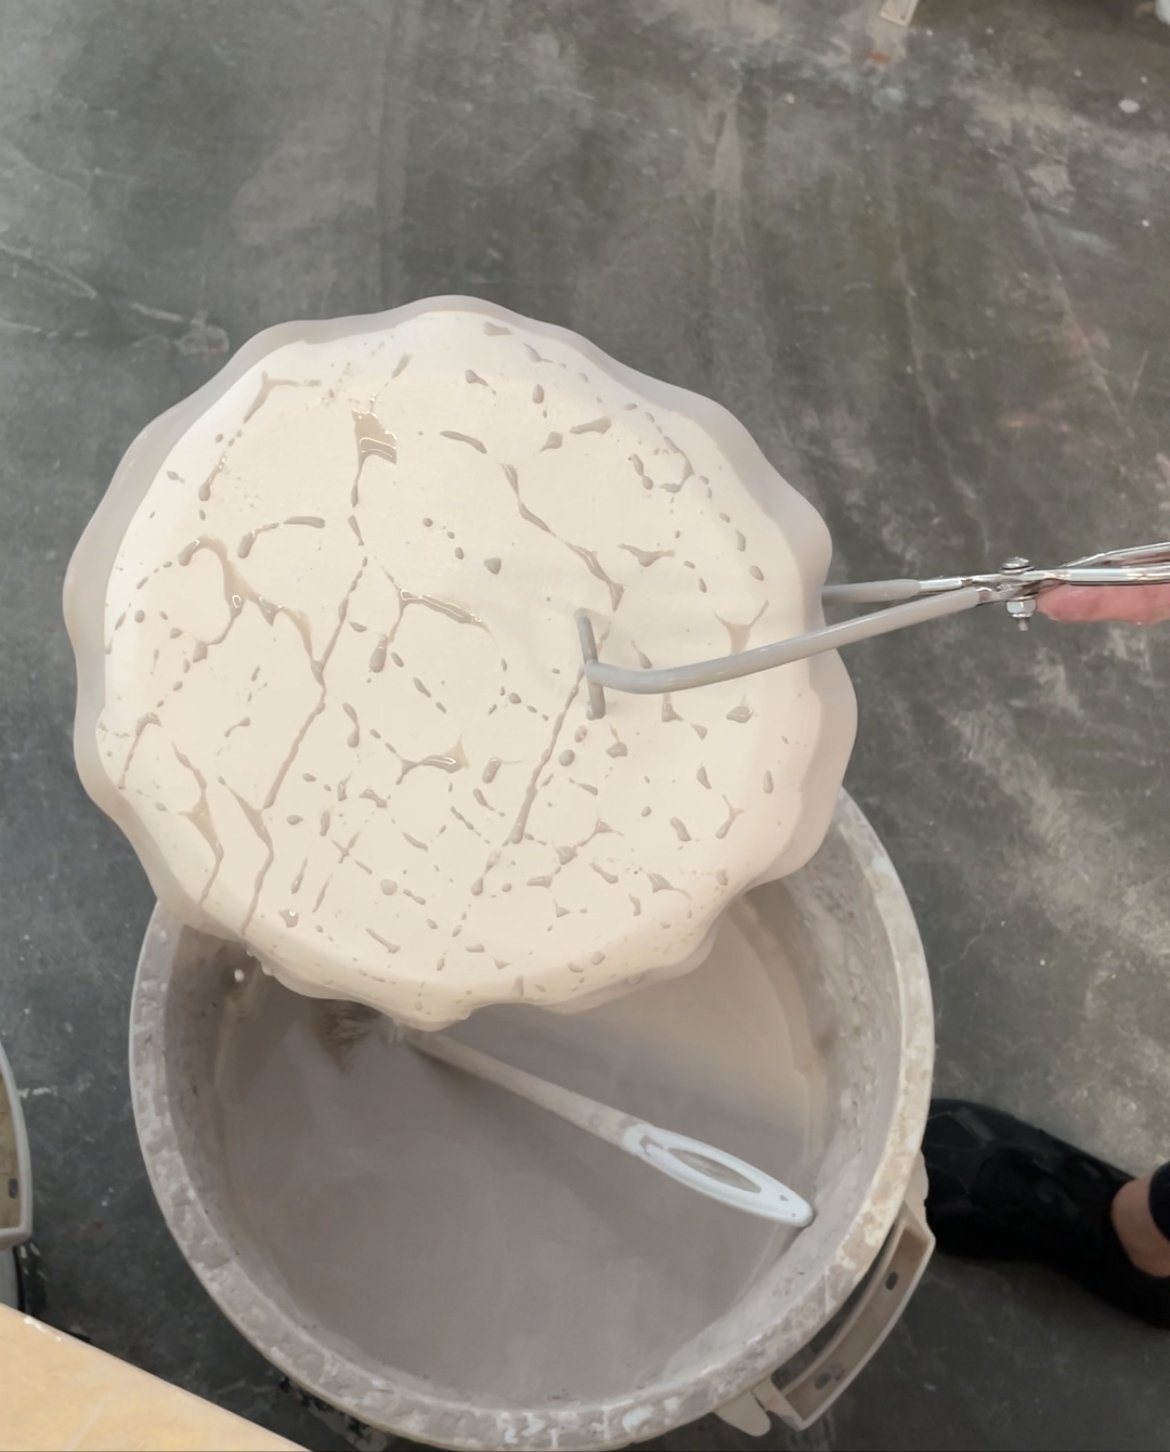 CERAMIC WAX RESIST: How To Use On Your Pottery 🎨 